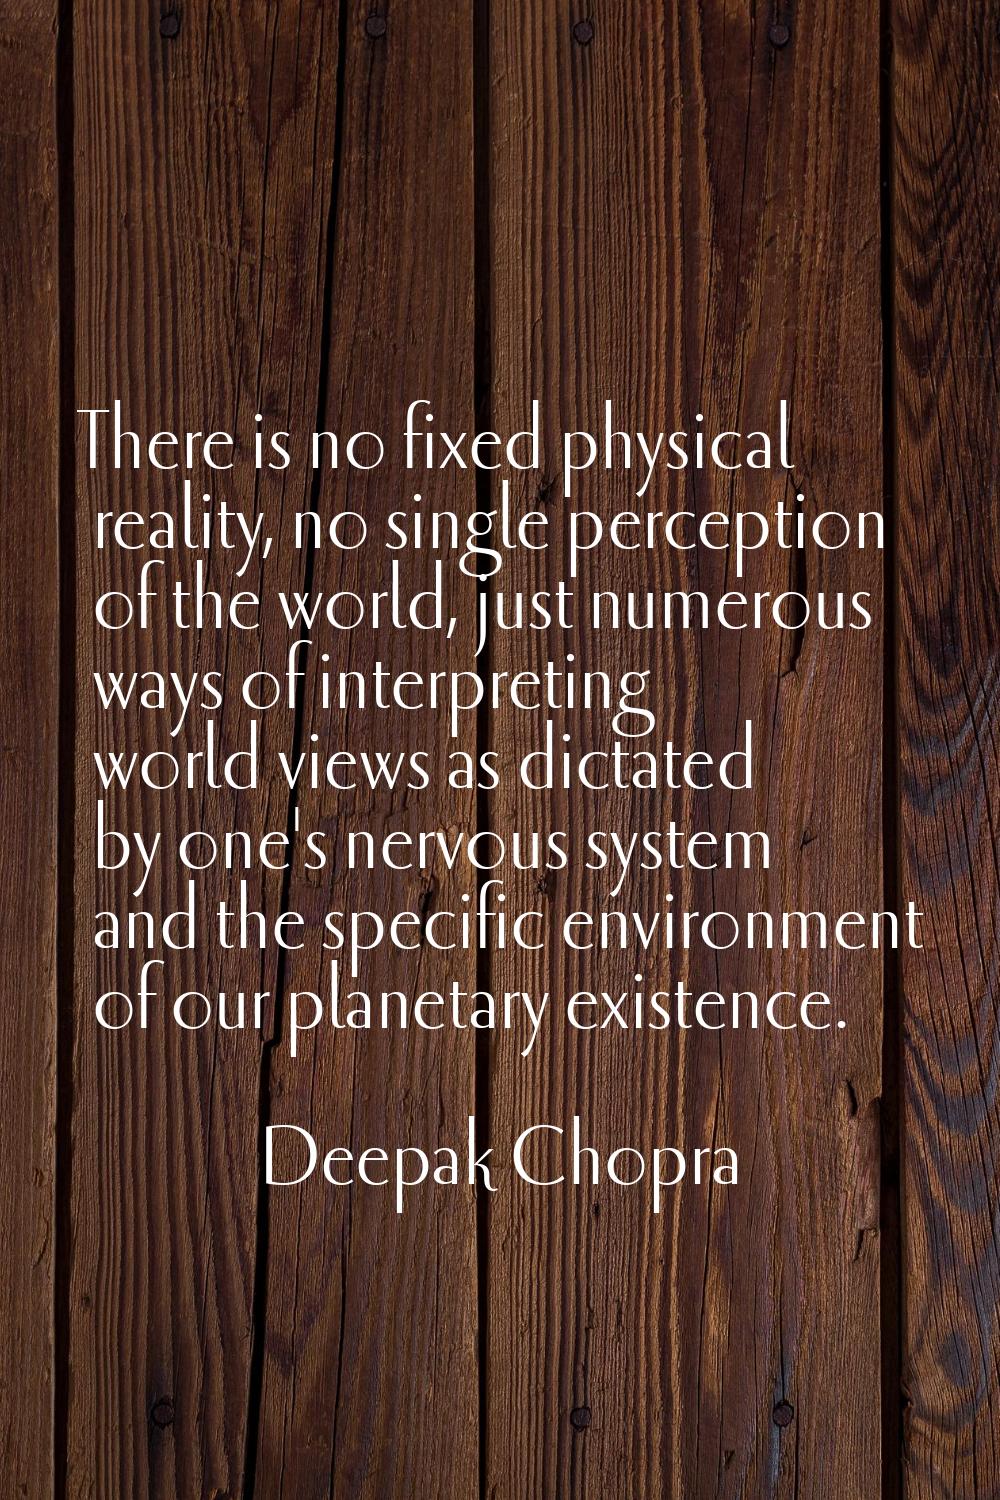 There is no fixed physical reality, no single perception of the world, just numerous ways of interp